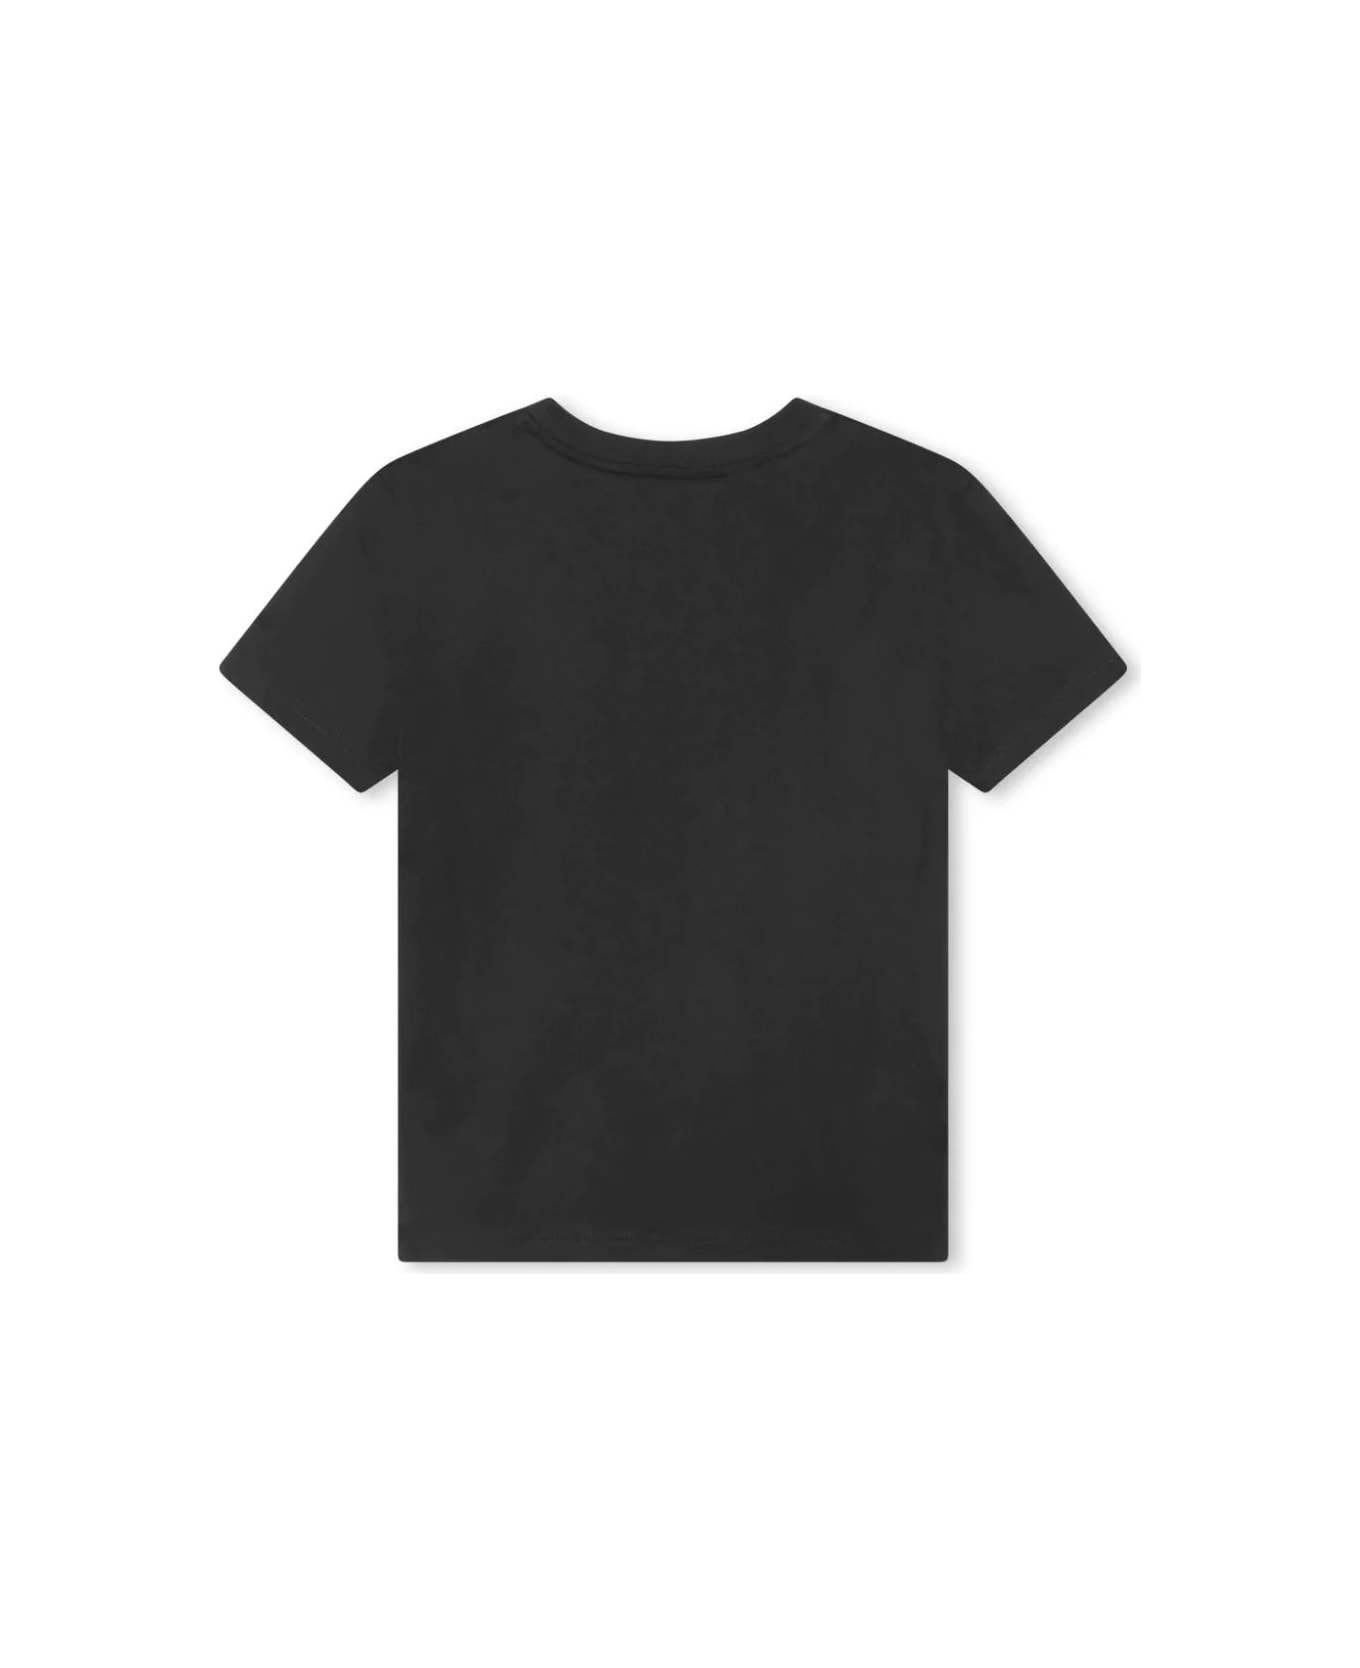 Givenchy Black Givenchy Only The Best T-shirt - Black